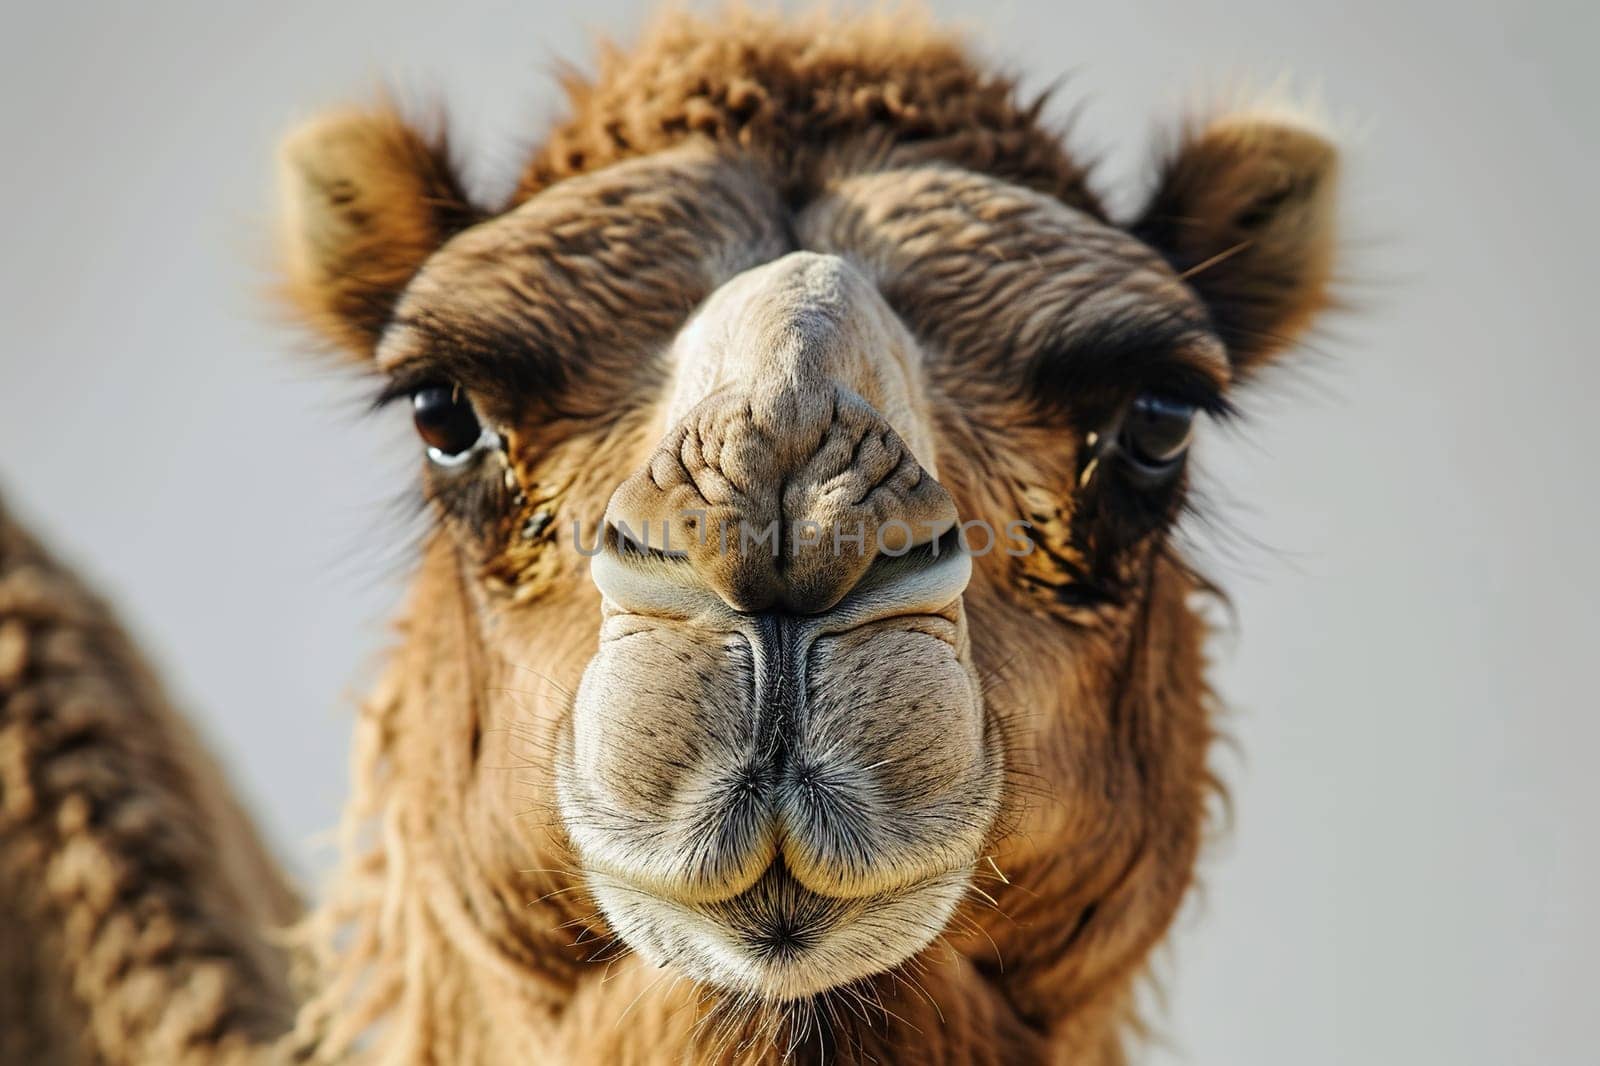 Close-up portrait of an adult camel on a white background.